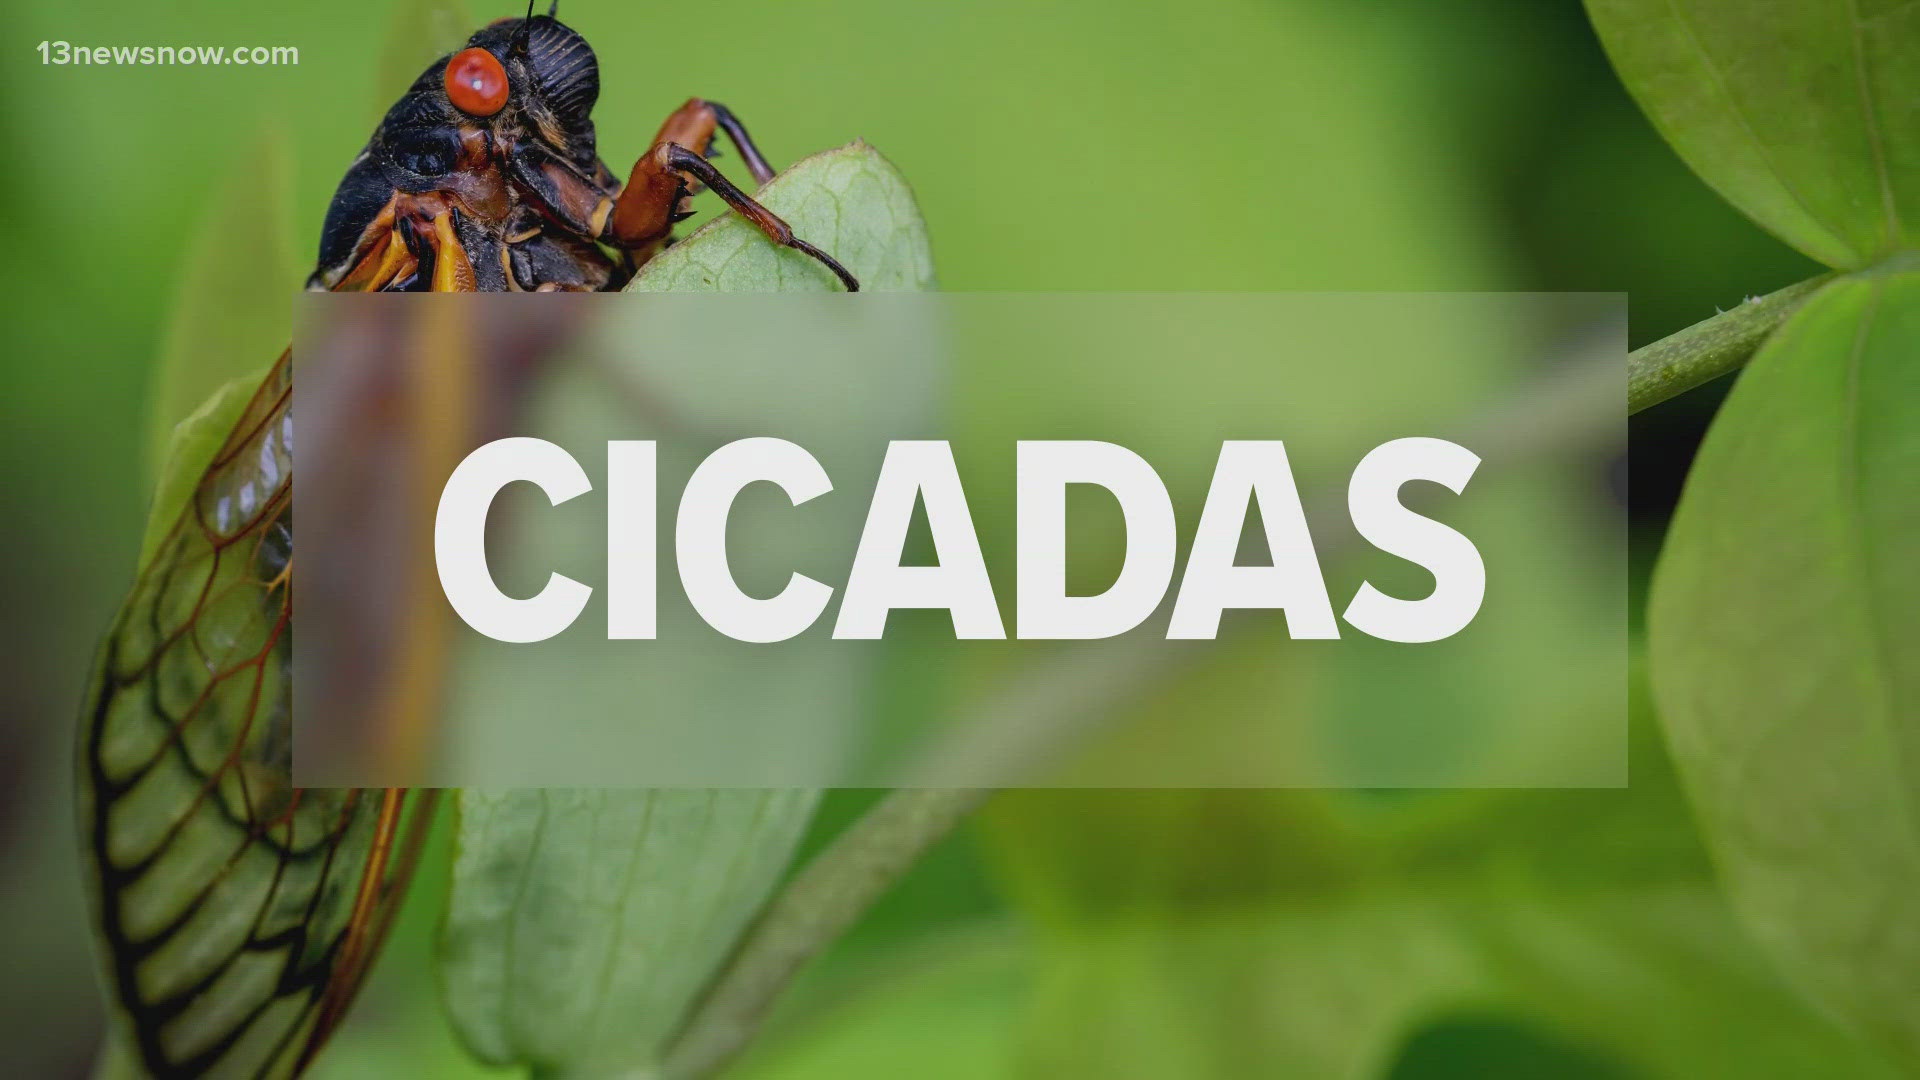 In North Carolina, a sheriff's office has received numerous calls about car alarms going off. There are also concerns about cicadas attracting copperhead snakes.